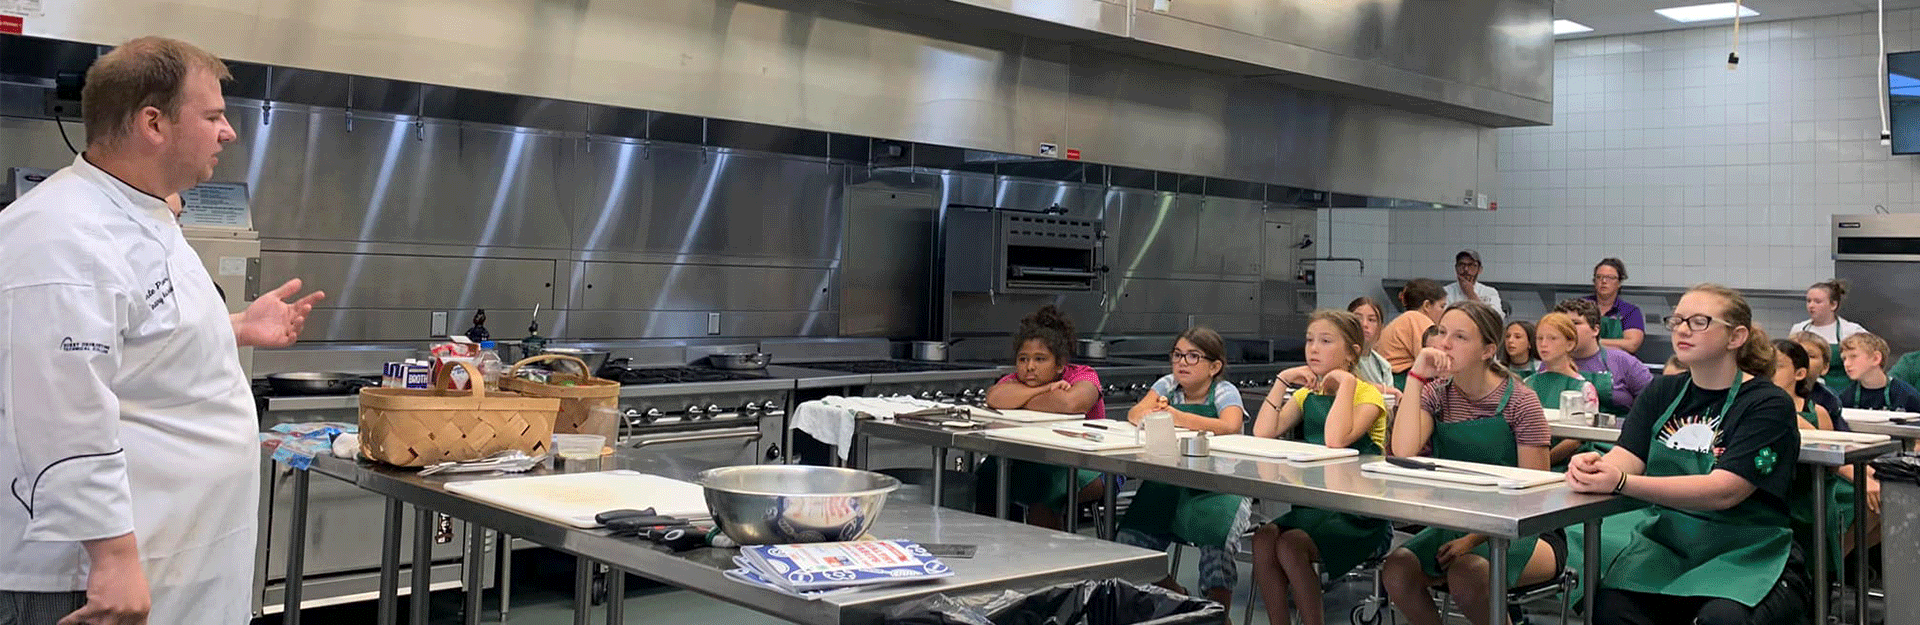 Chef with kids in professional kitchen